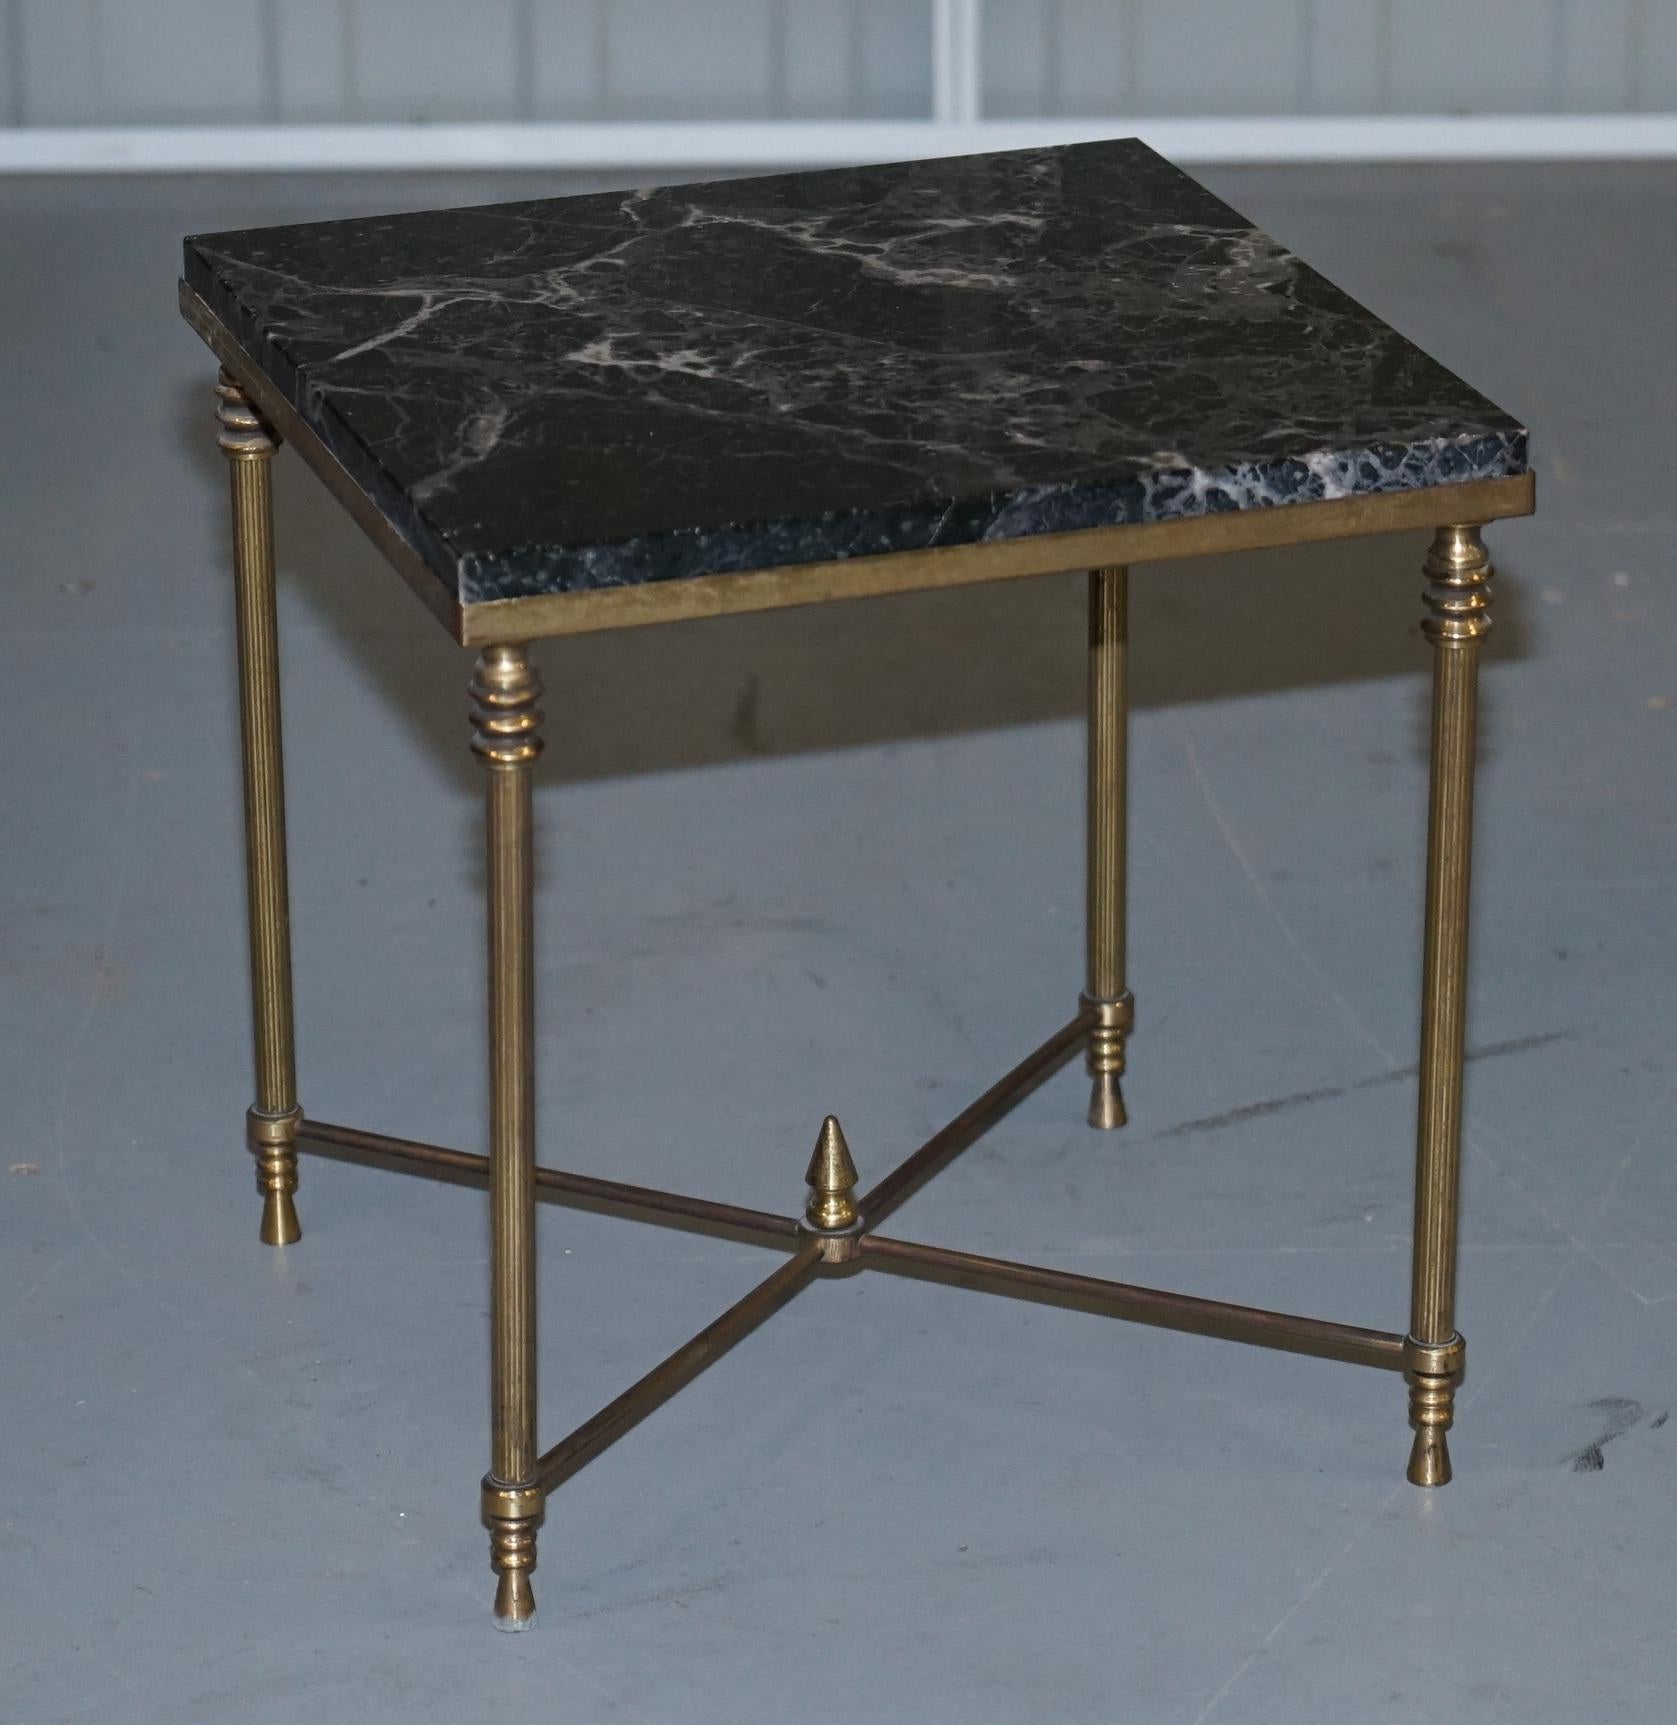 Vintage Italian Nest of Three Tables circa 1940s Brass with Thick Marble Top 12